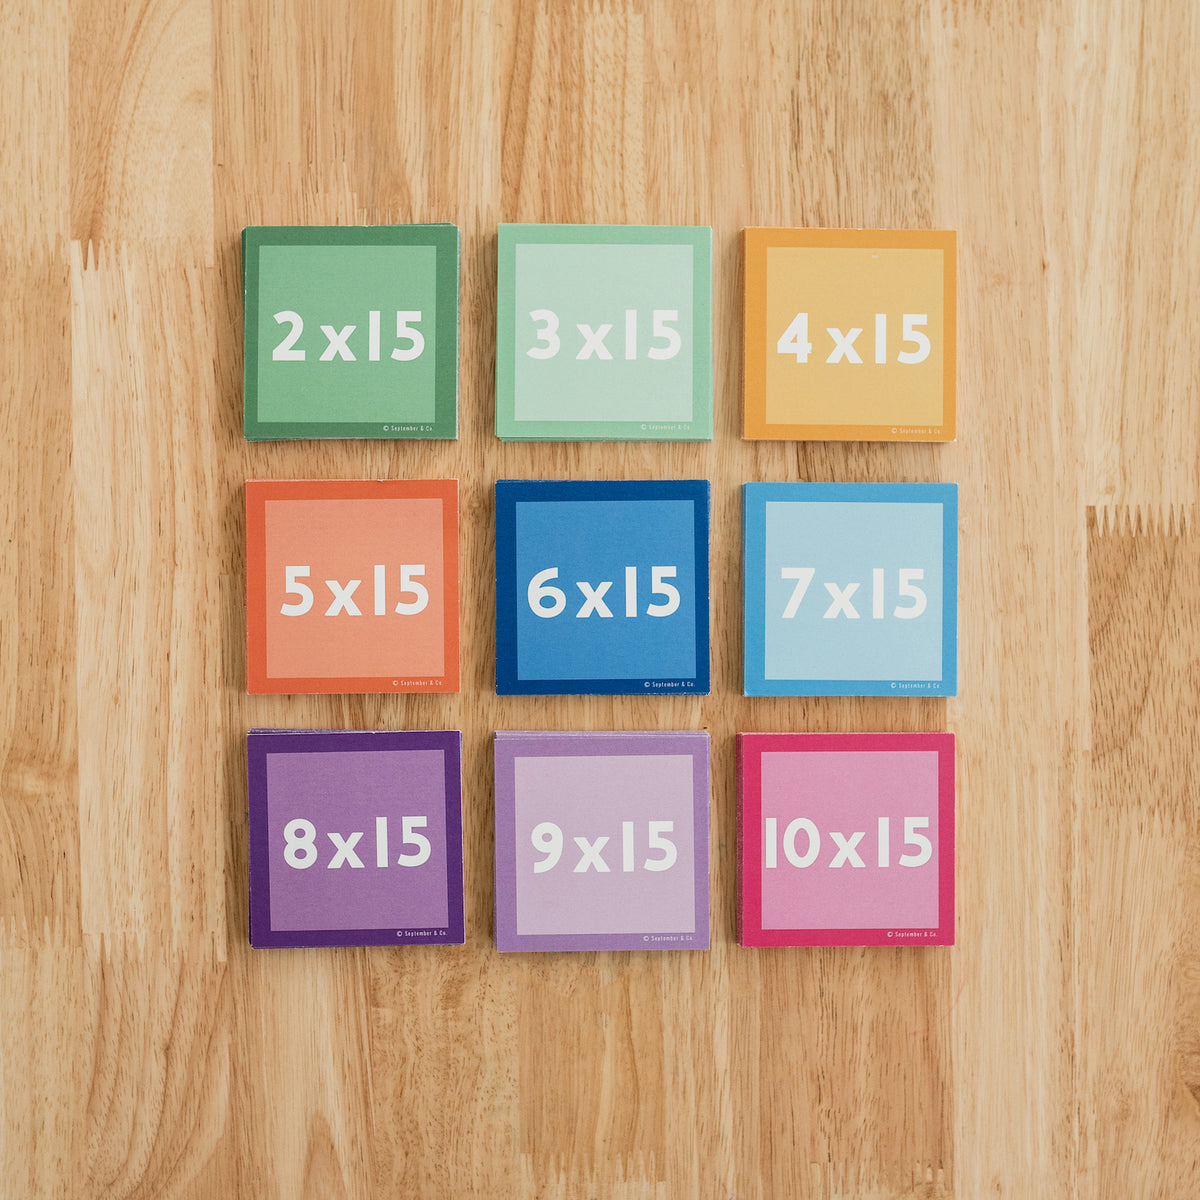 Skip Counting Cards